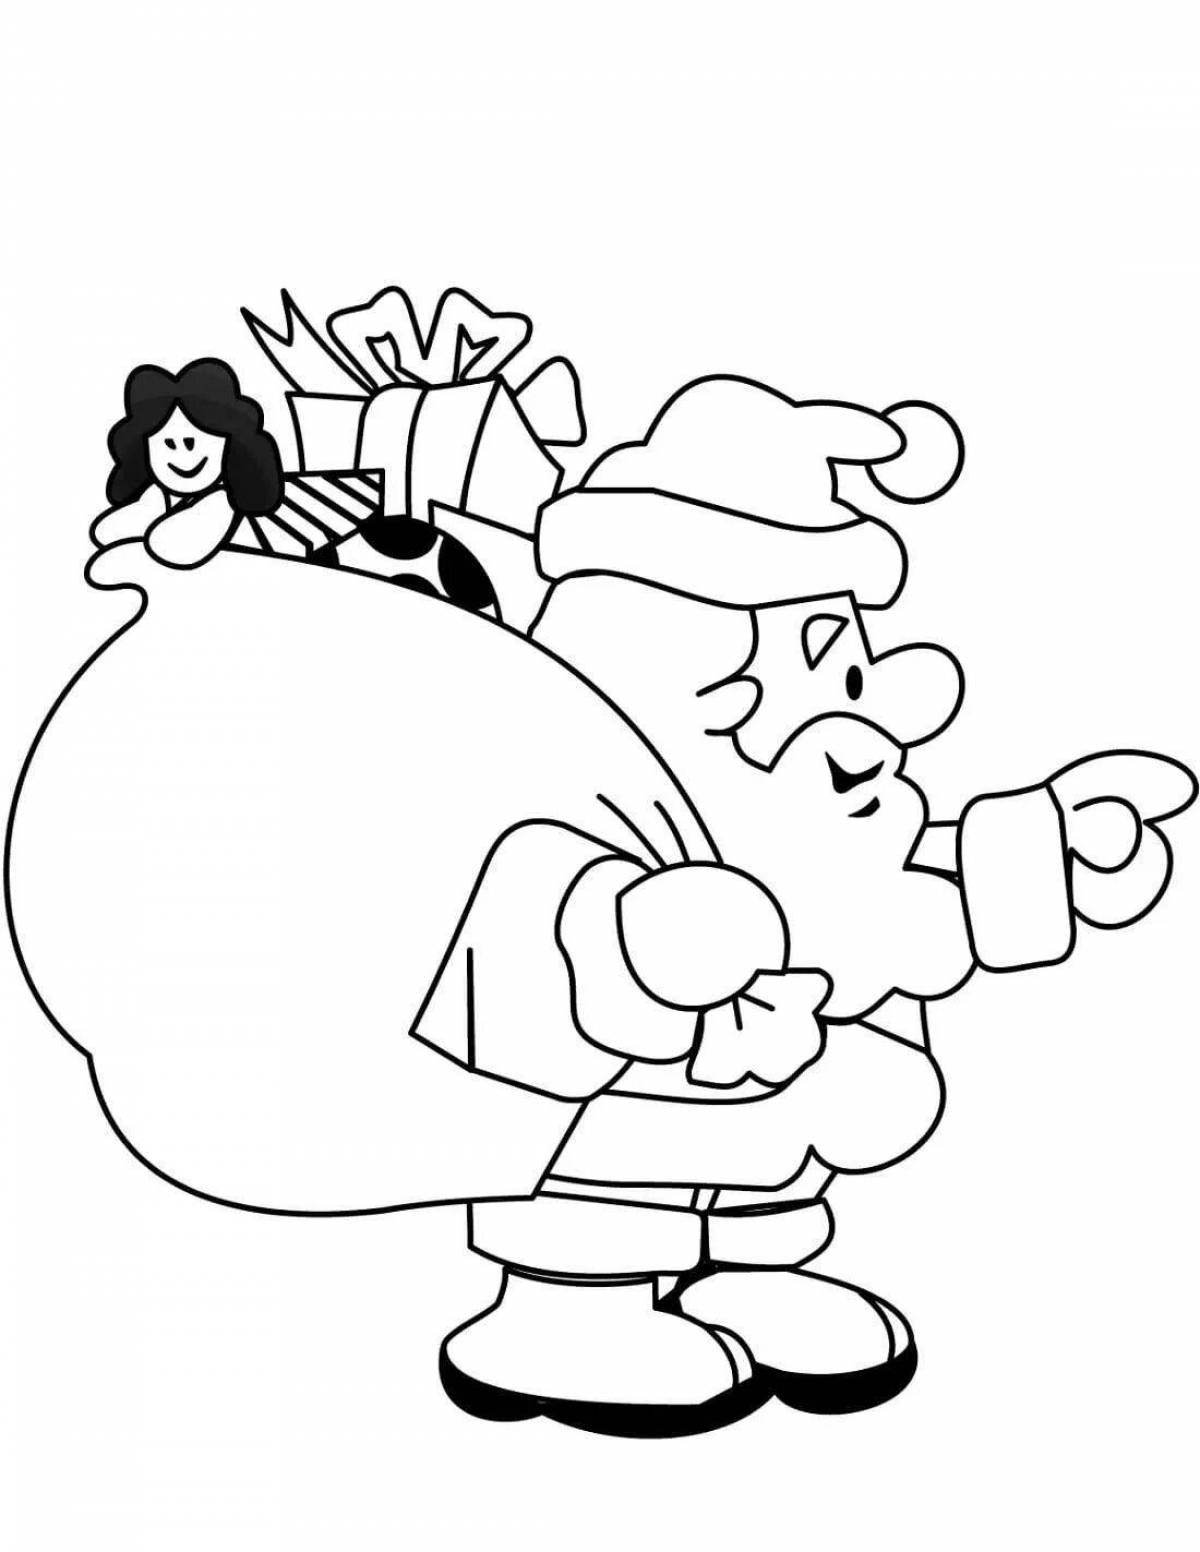 Coloring page festive Santa Claus with a bag